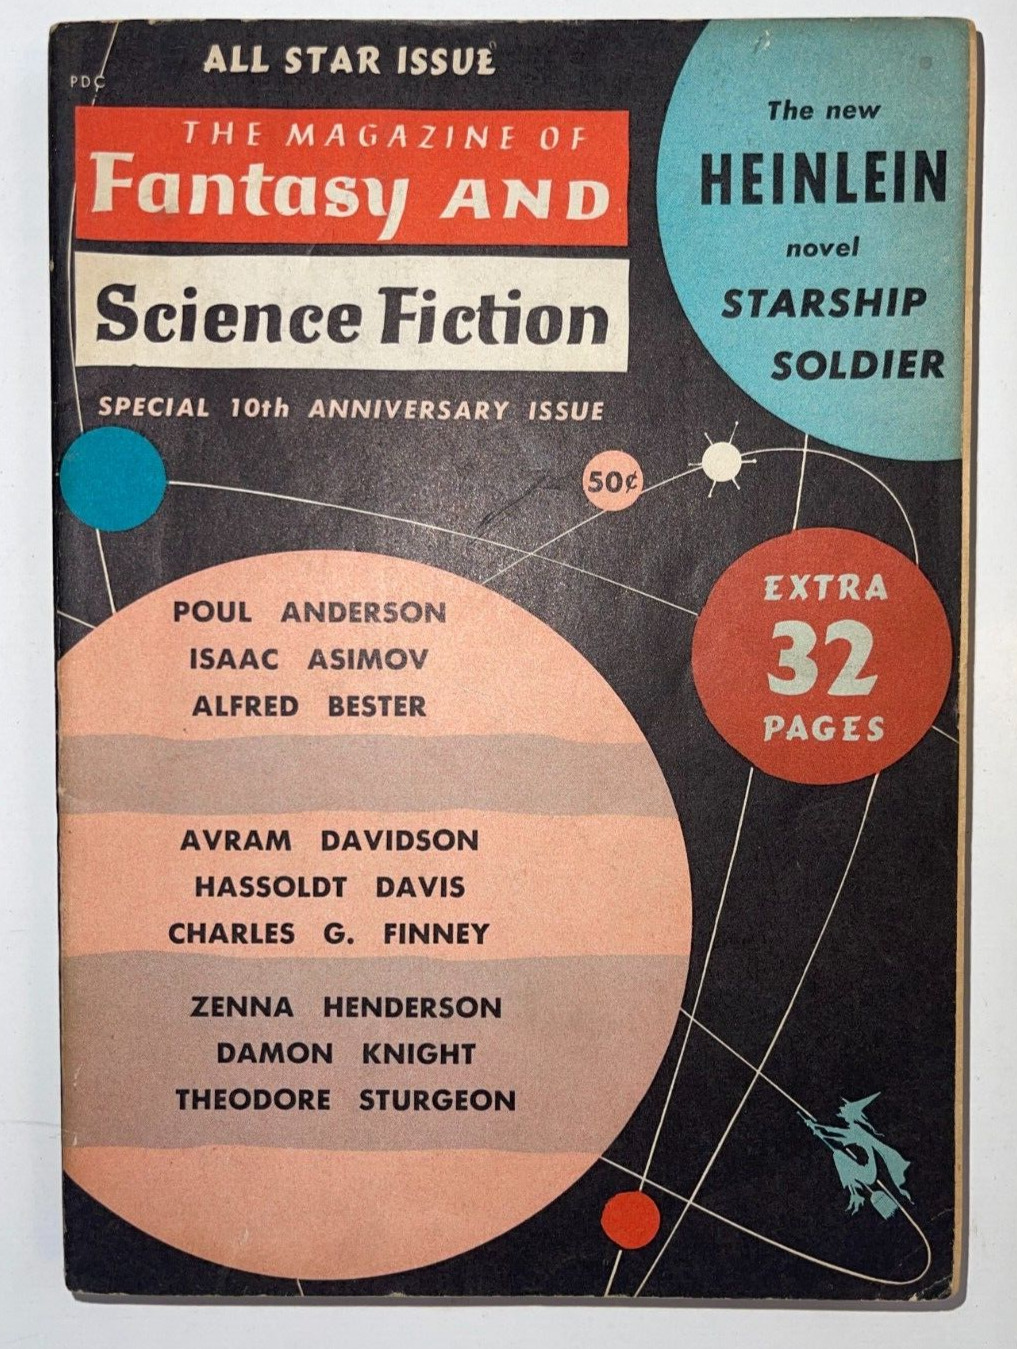 FANTASY and SCIENCE FICTION HEINLEIN STARSHIP SOLDIER OCT 1959 Cover EMSH